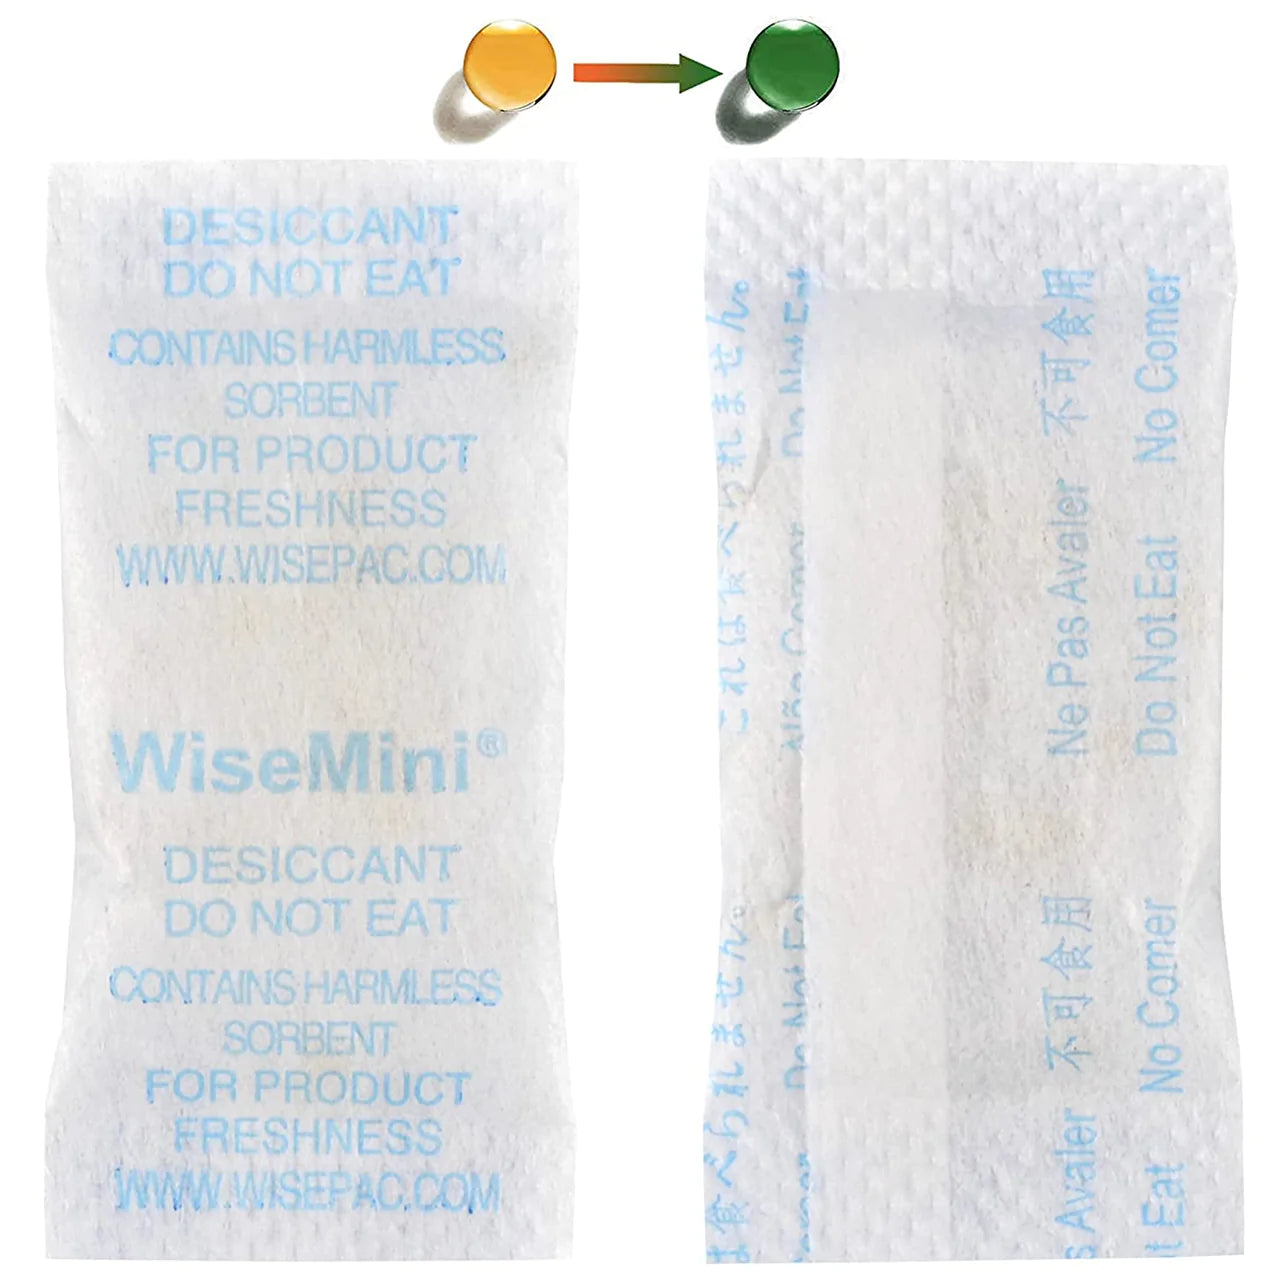 Two biodegradable plant desiccant pouches on a white background